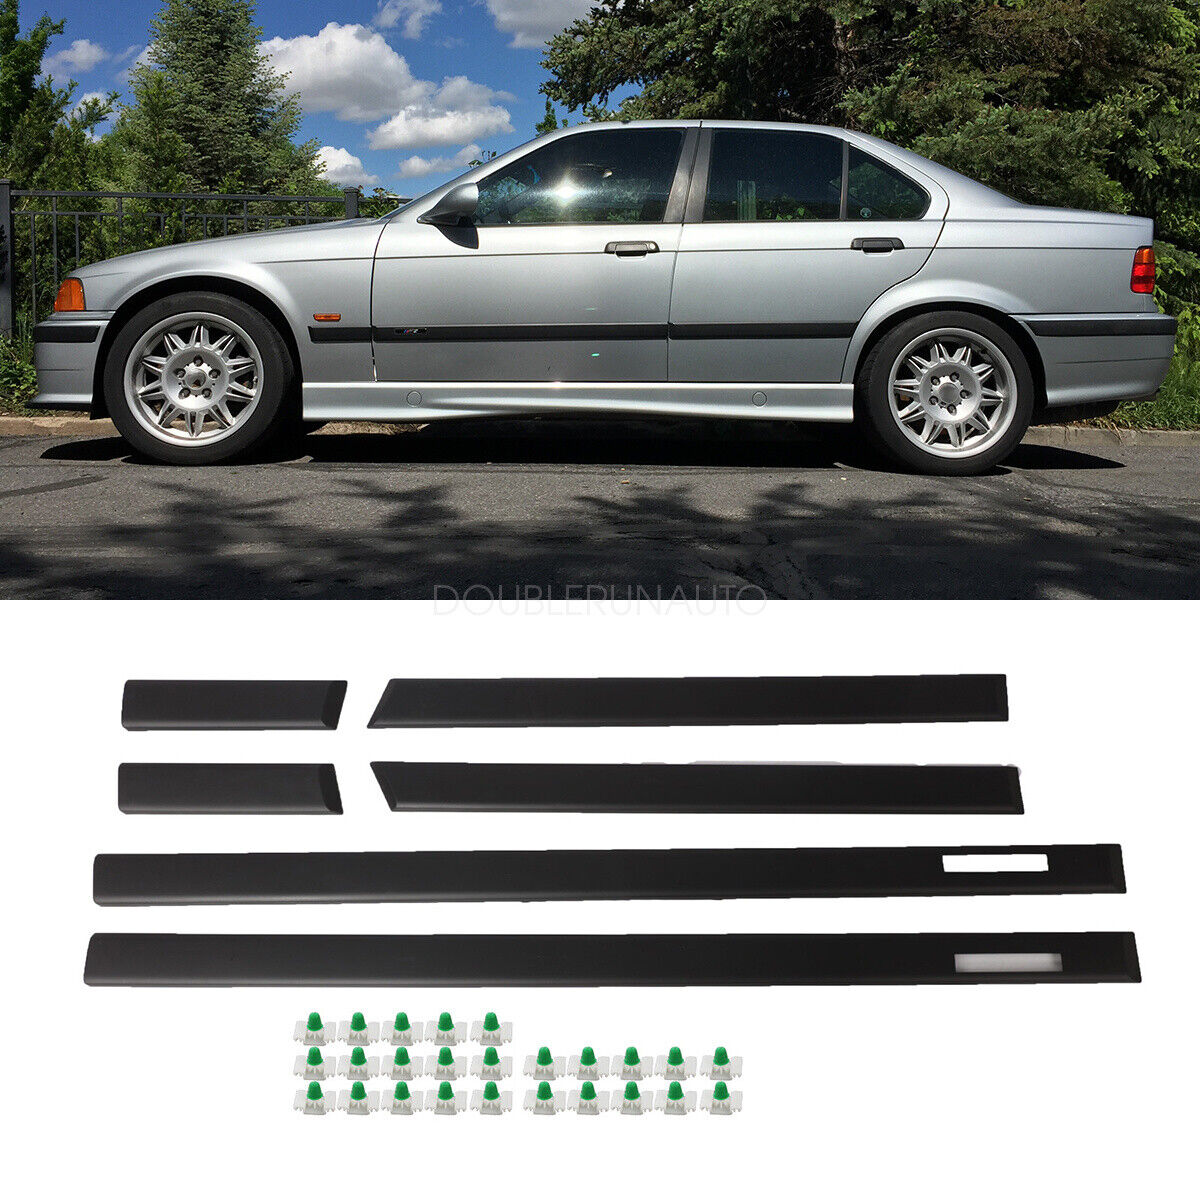 BODY SIDE MOULDING TRIM for 92-98 BMW E36 M3 style 3-SERIES SEDAN (4 DOOR only）